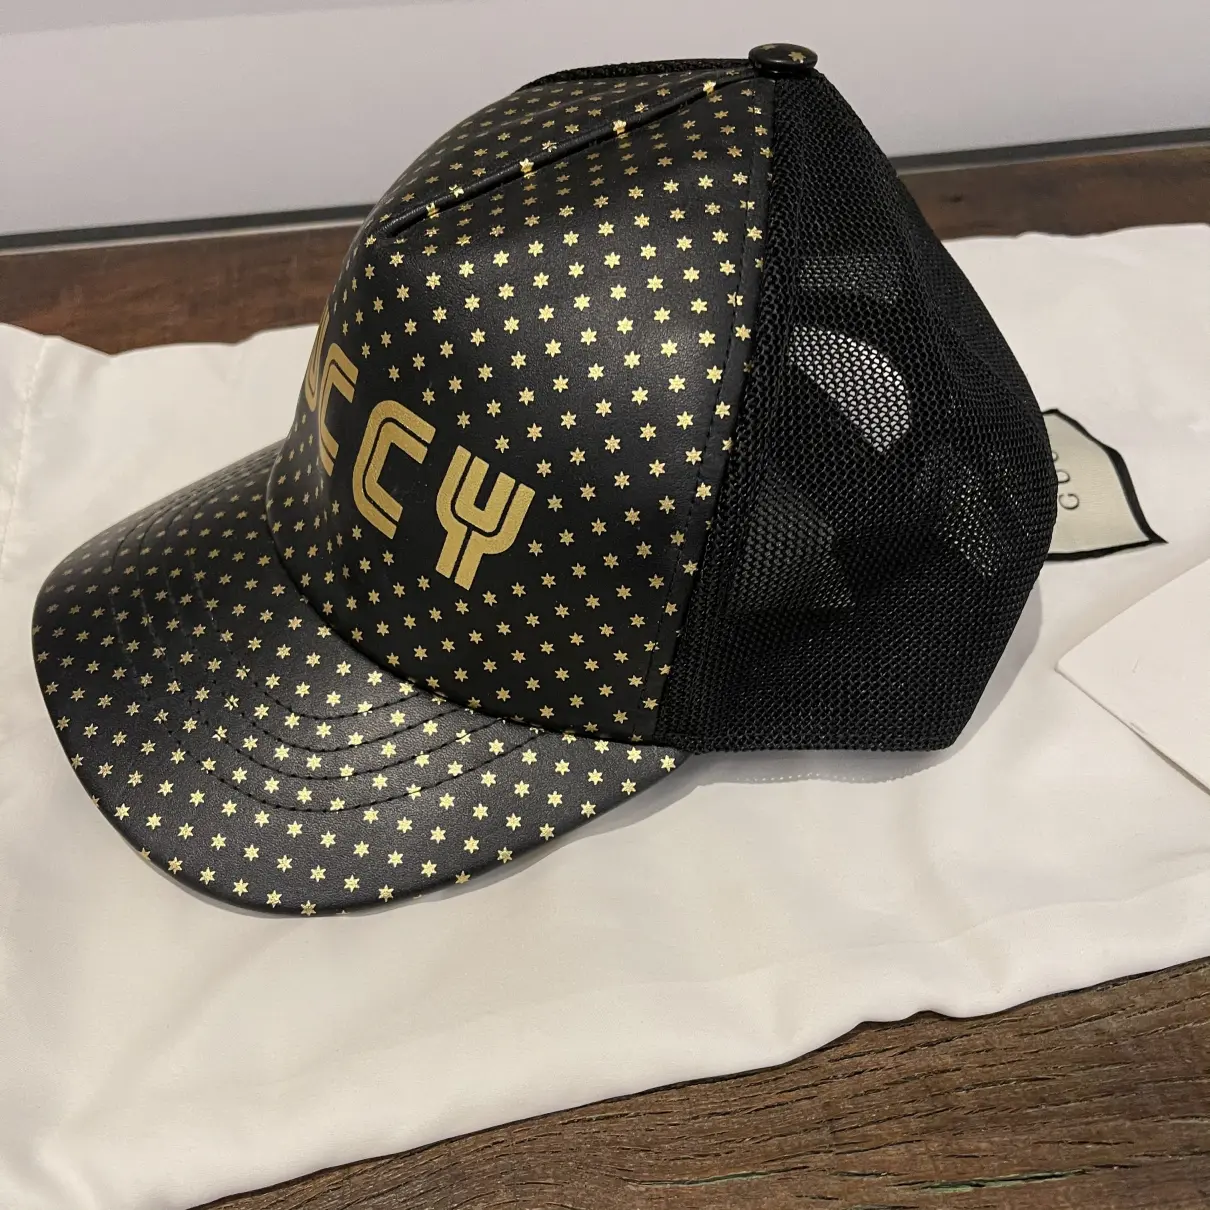 Buy Gucci Leather hat online